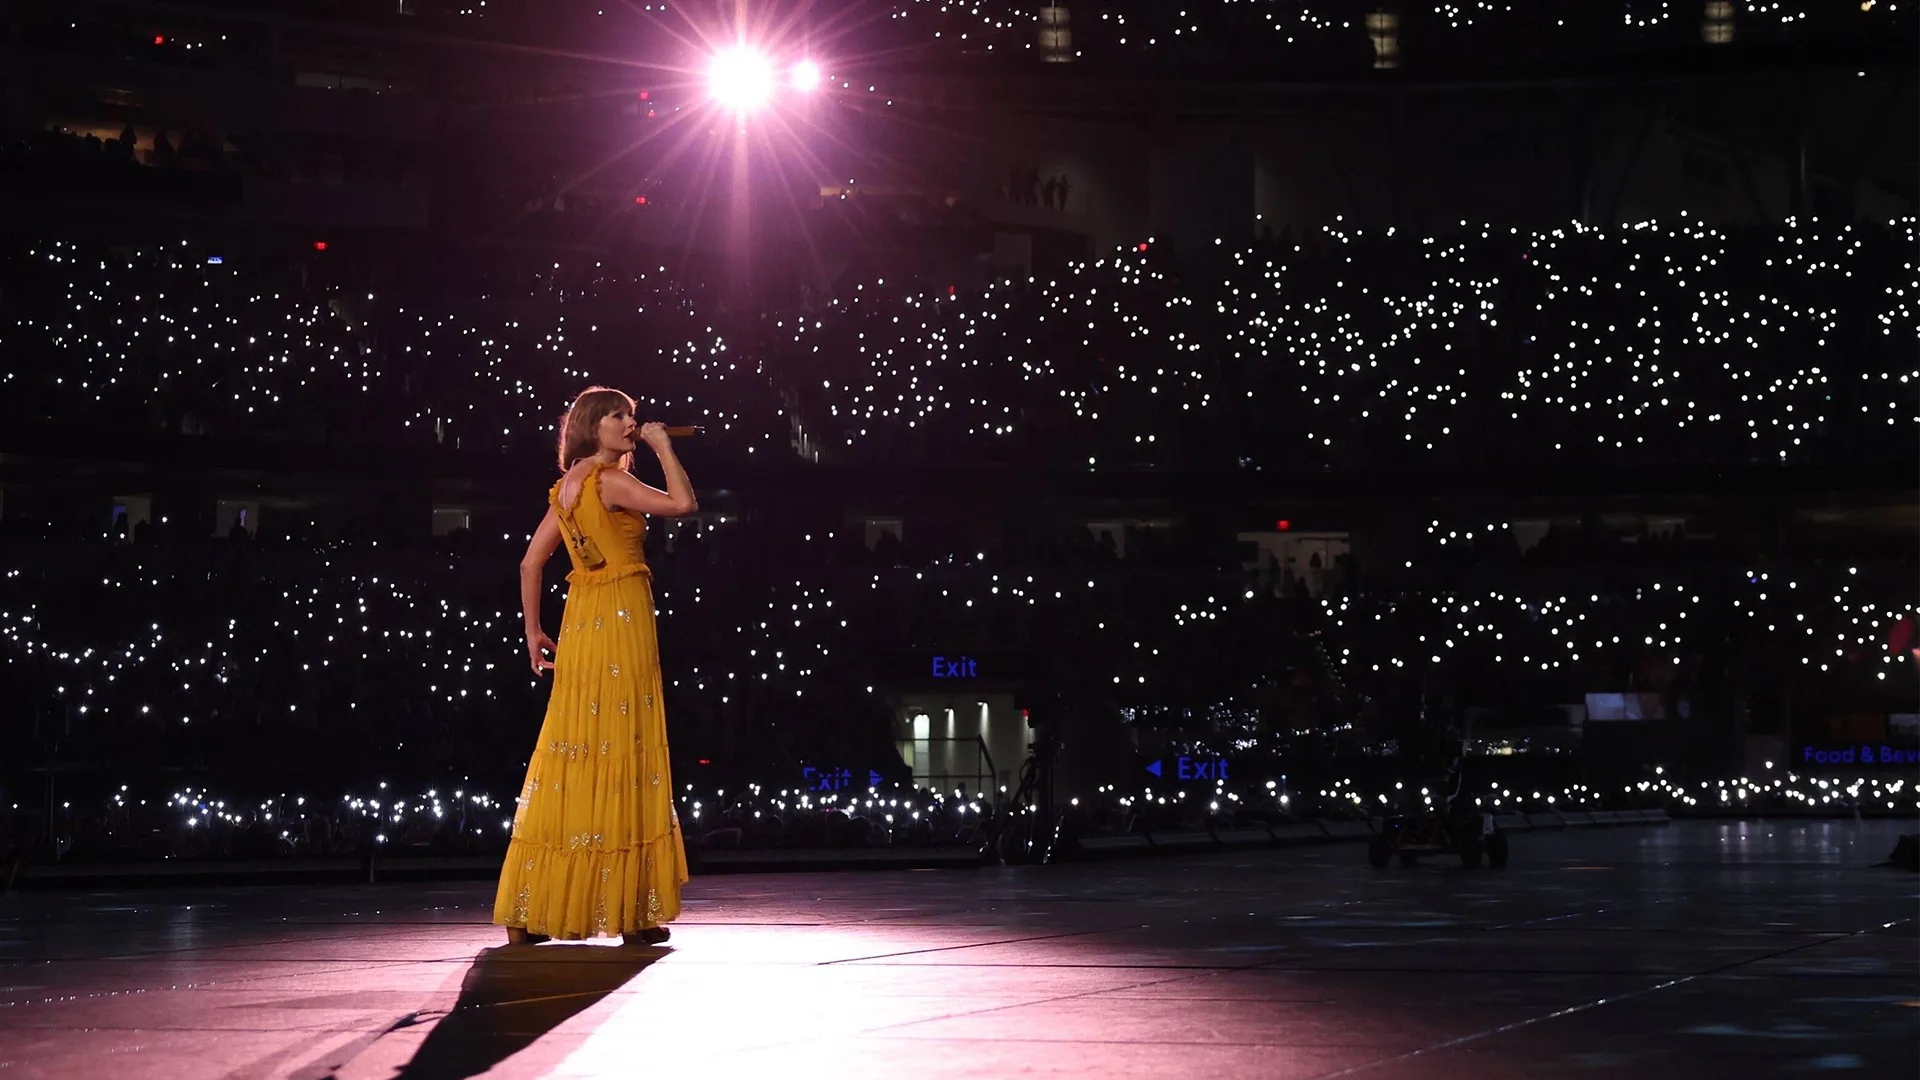 Taylor Swift wearing yellow dress singing into microphone infront of a crowd of thousands of fans holding bright lights